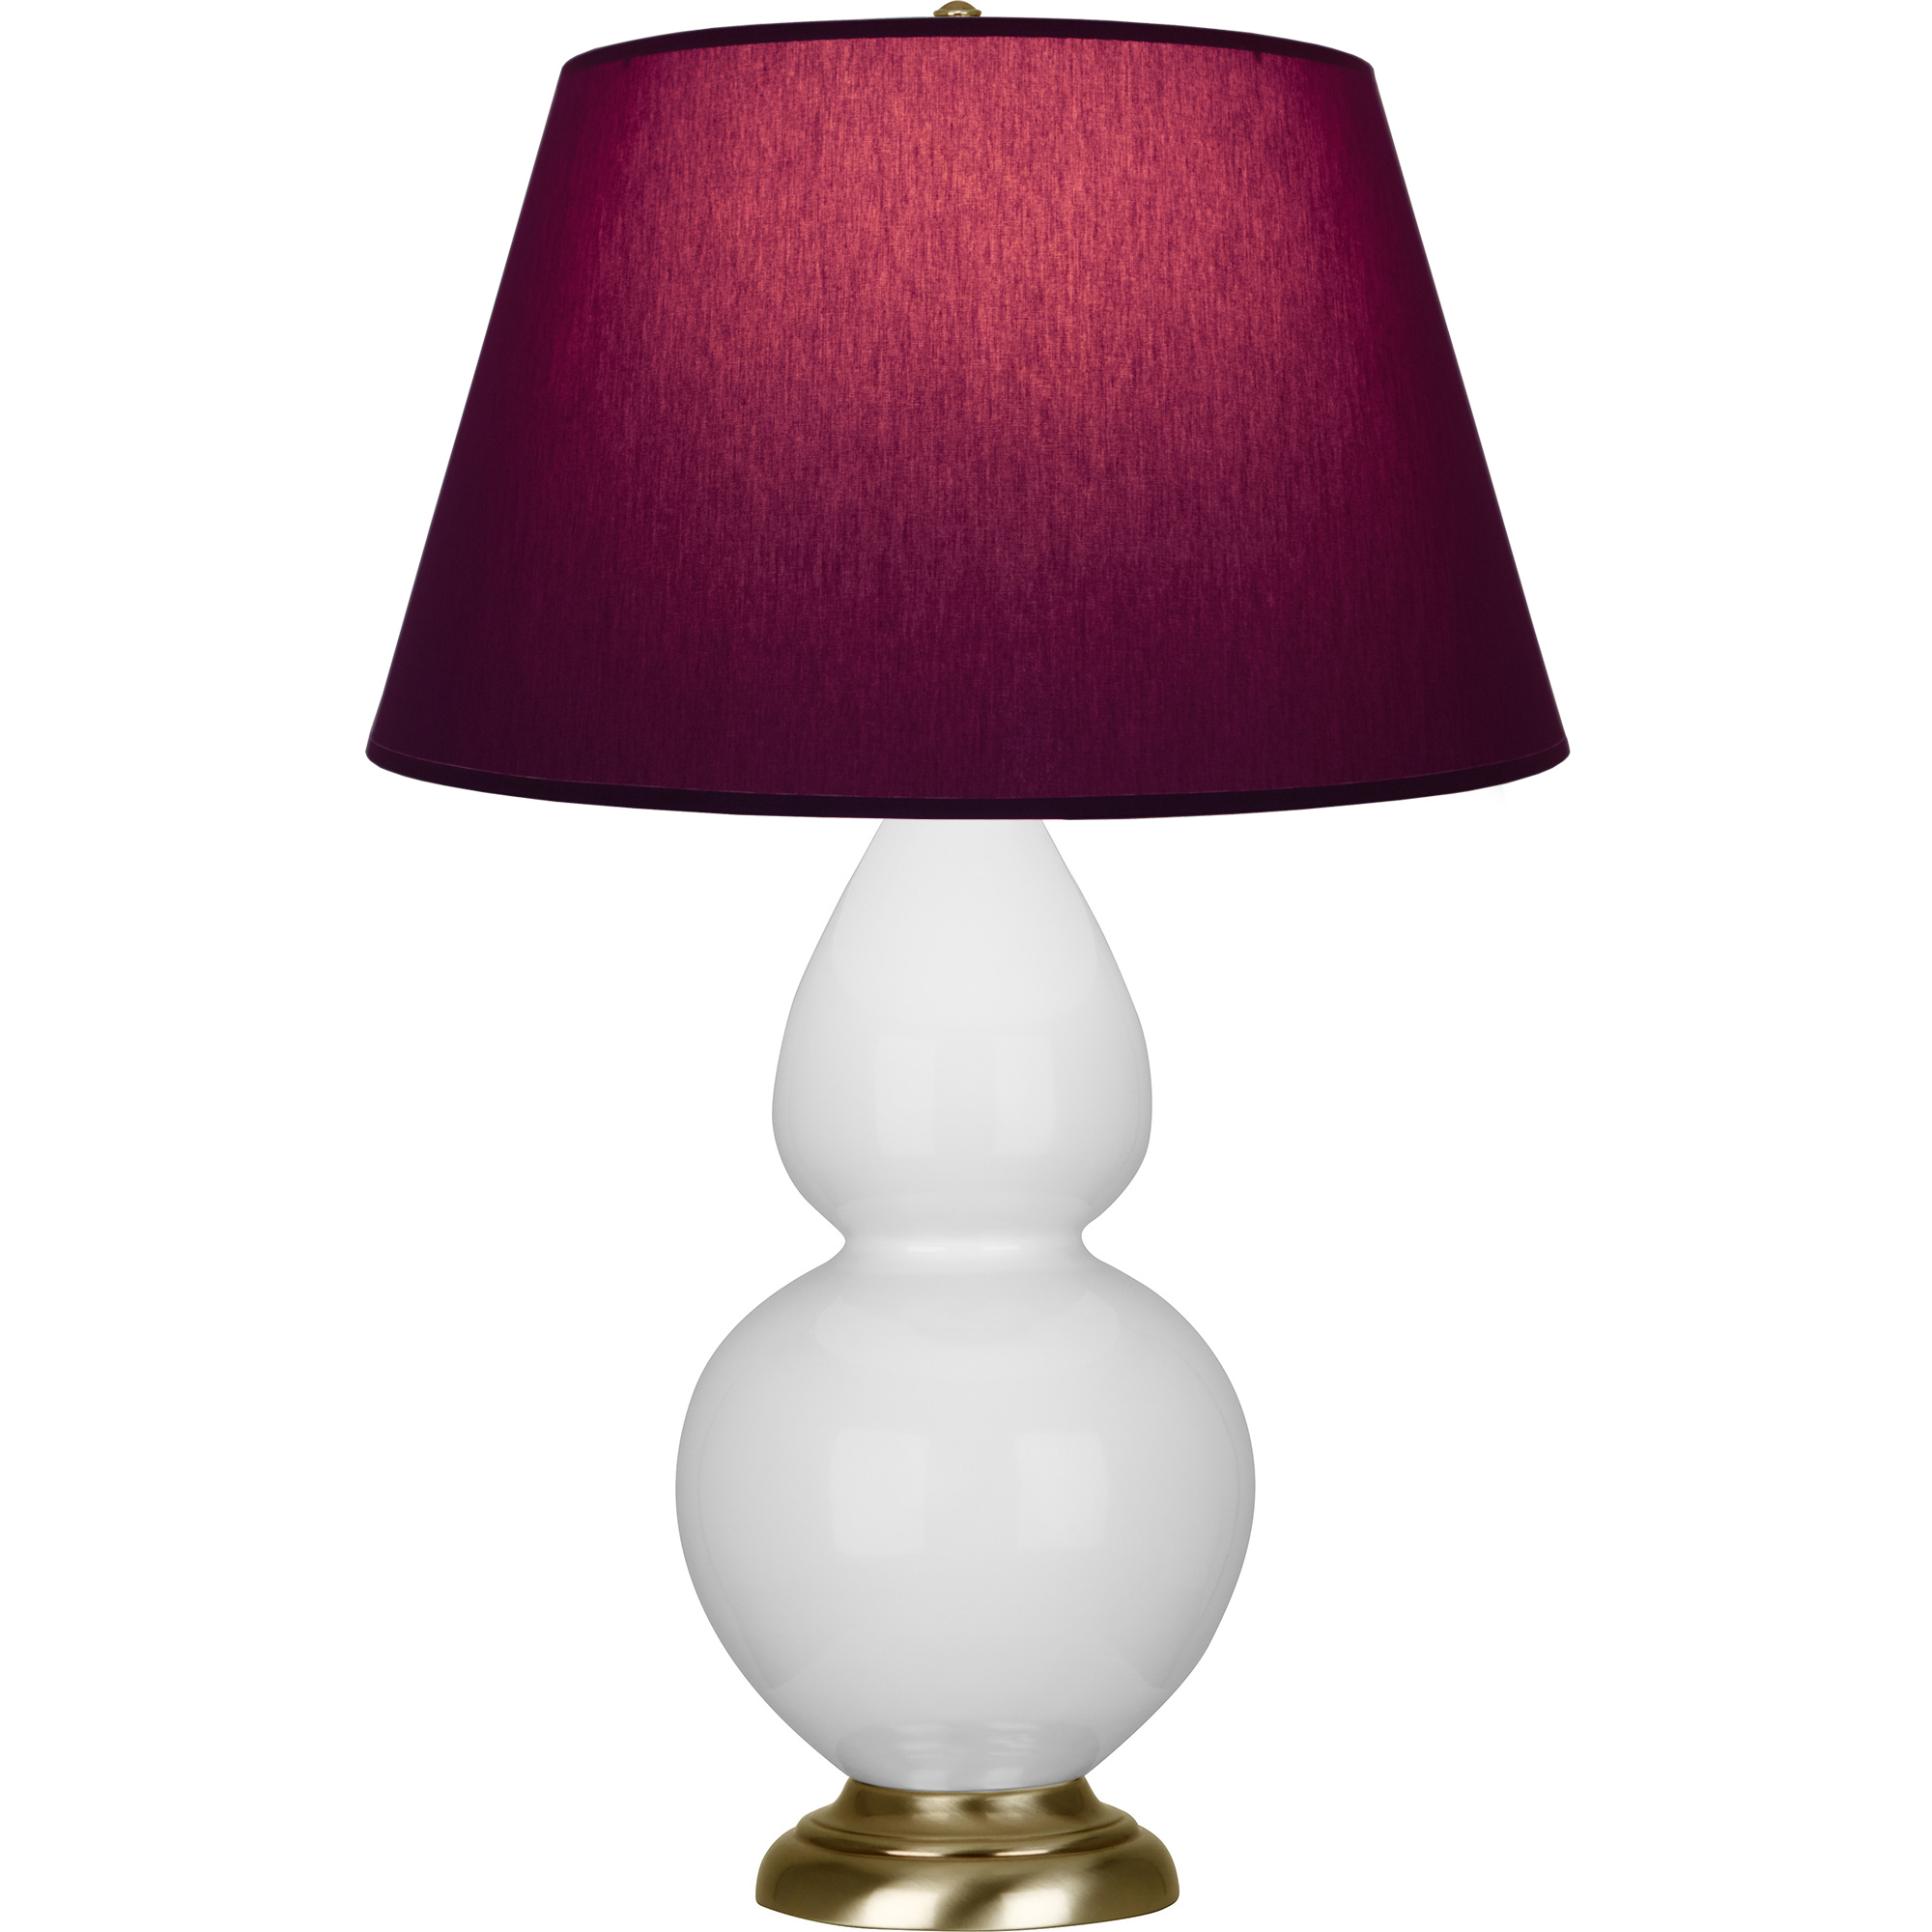 Double Gourd Table Lamp Style #DY20P